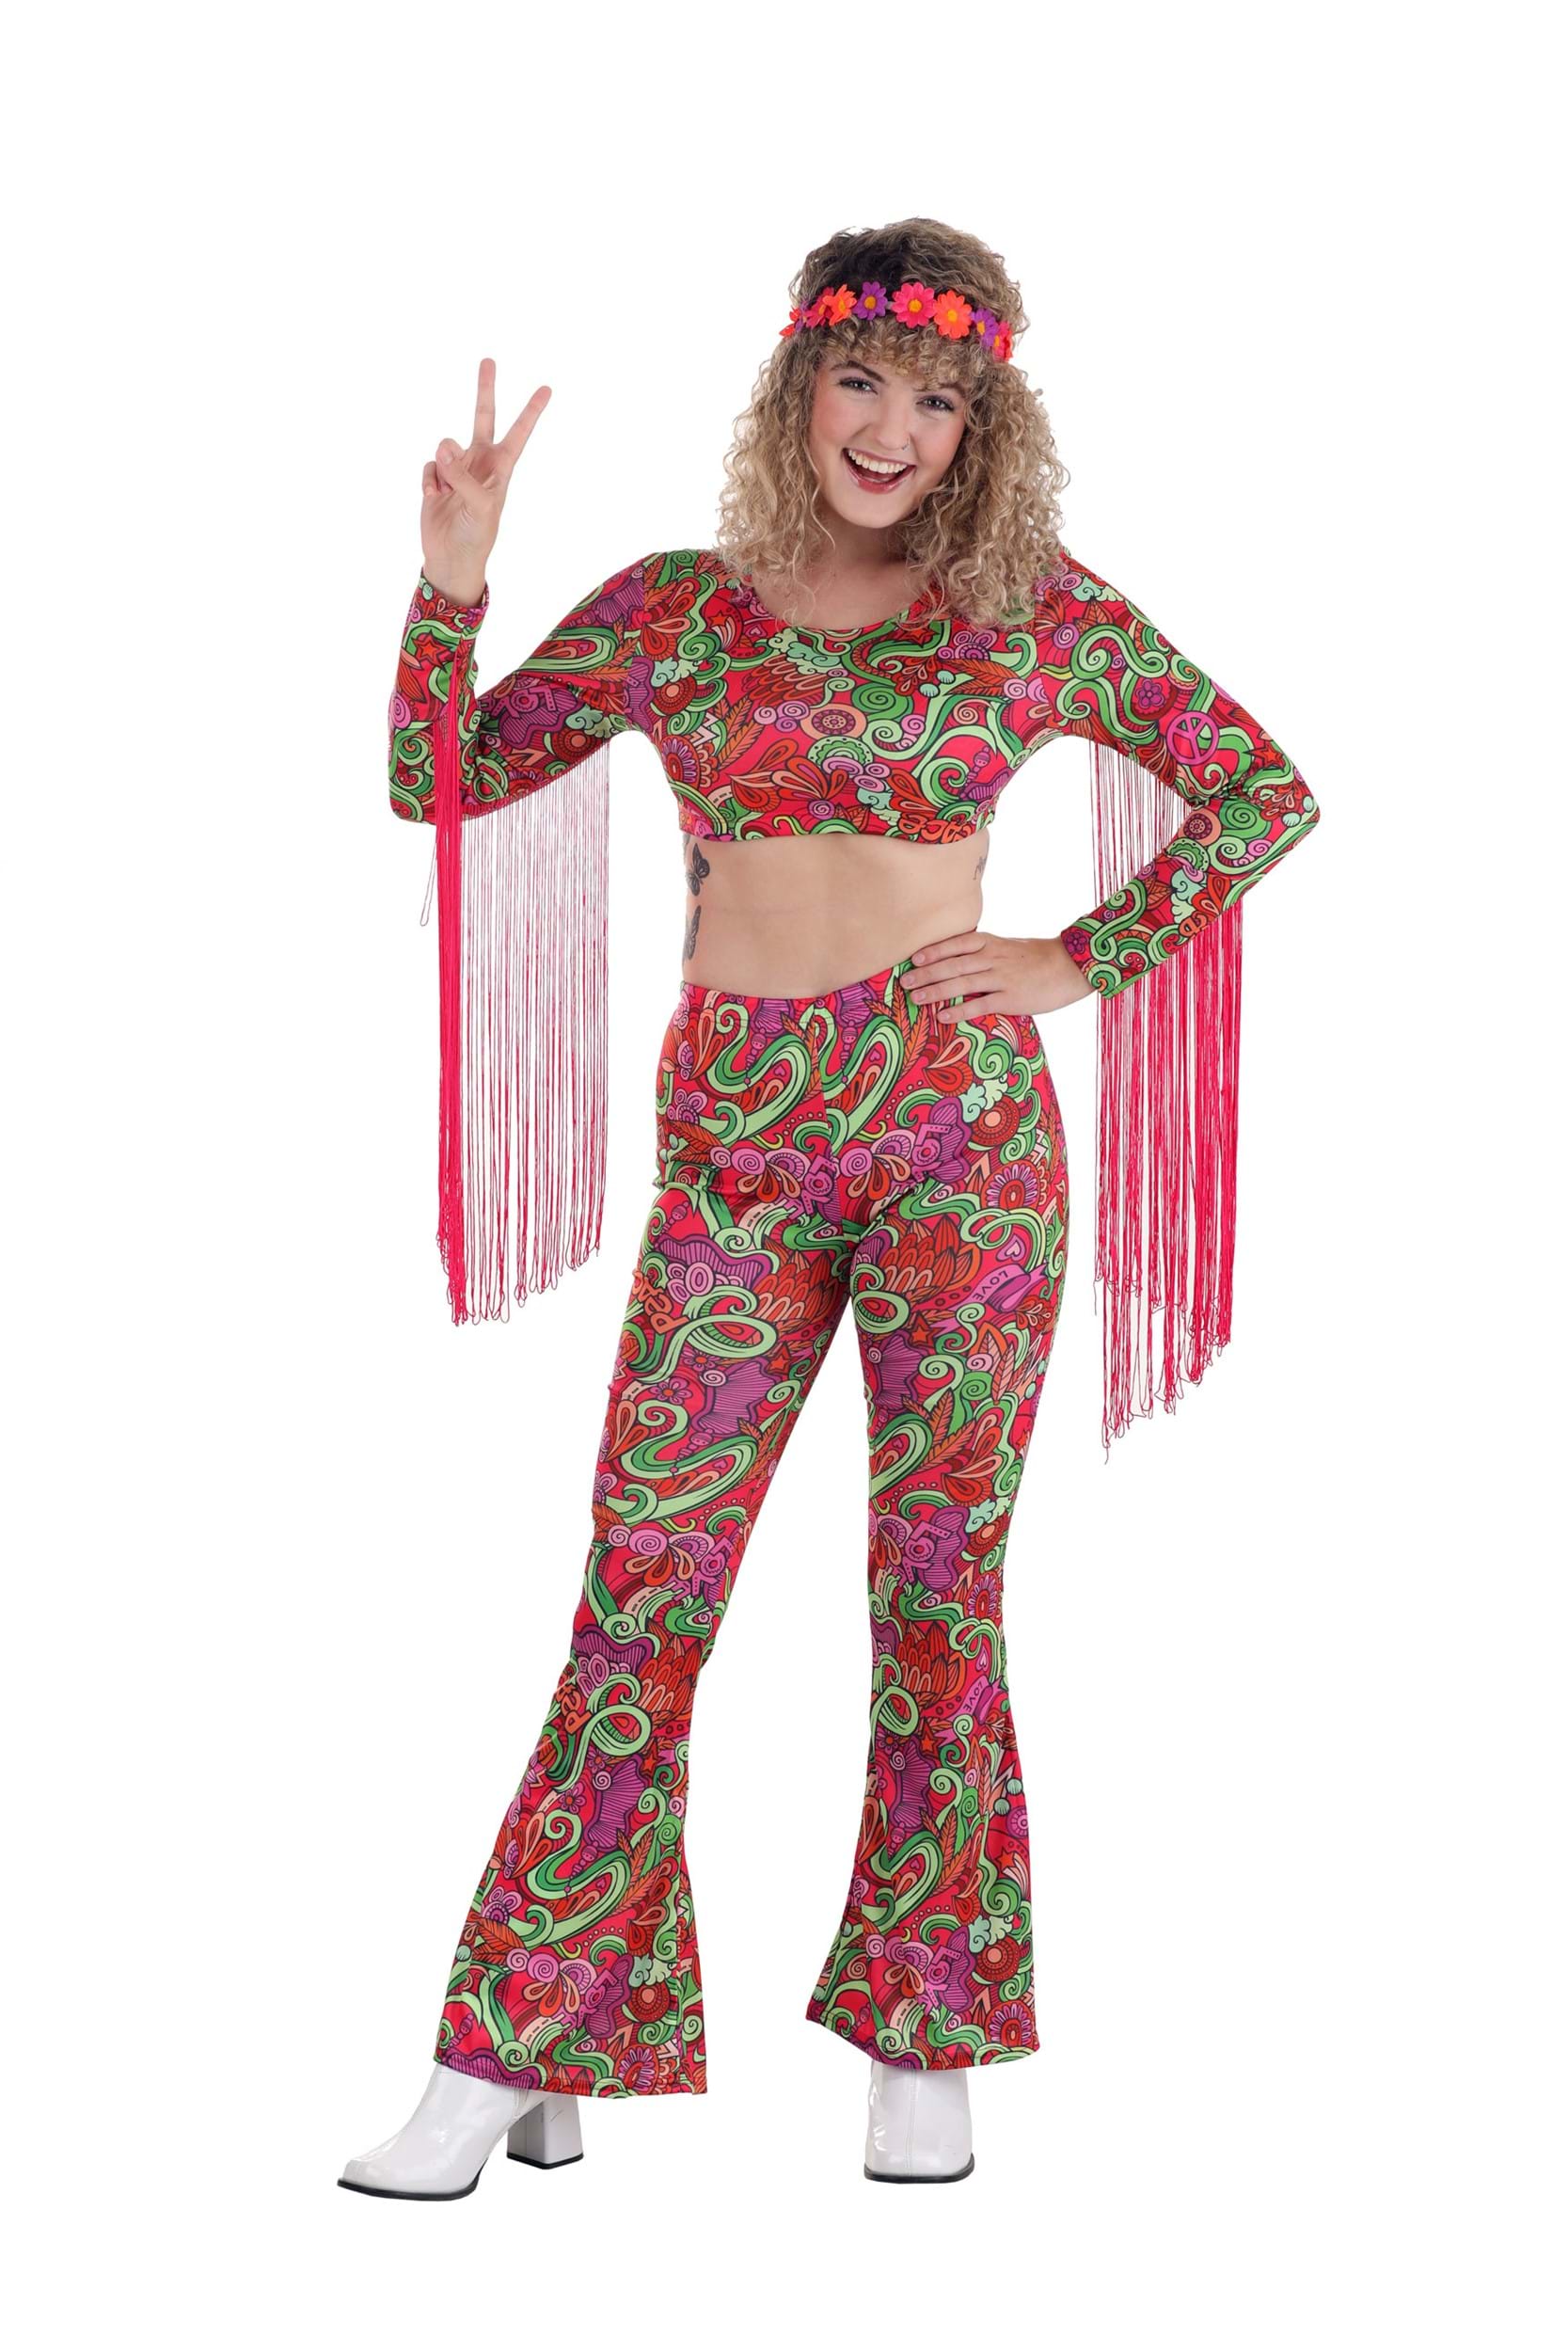 Home  Hippie outfits, Clothes, Retro outfits